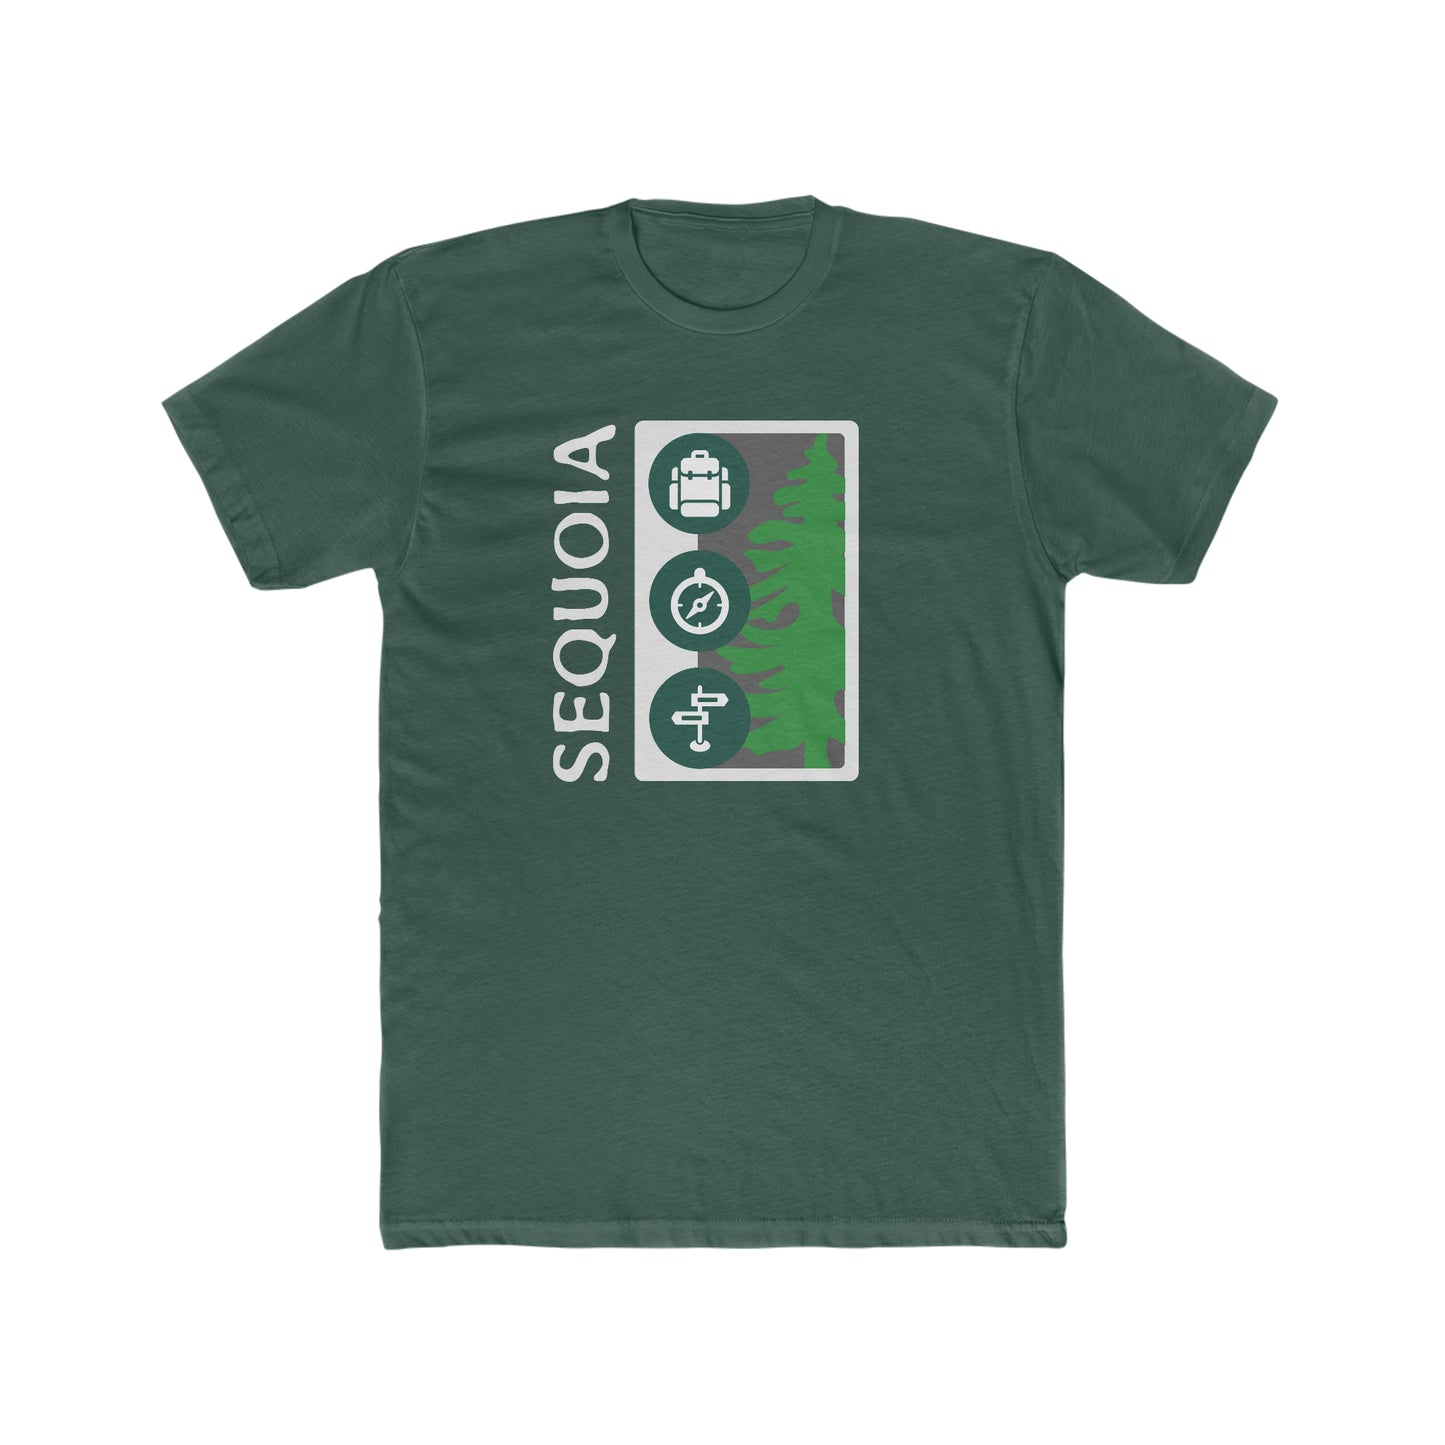 Sequoia National Park T-Shirt Tree Graphic